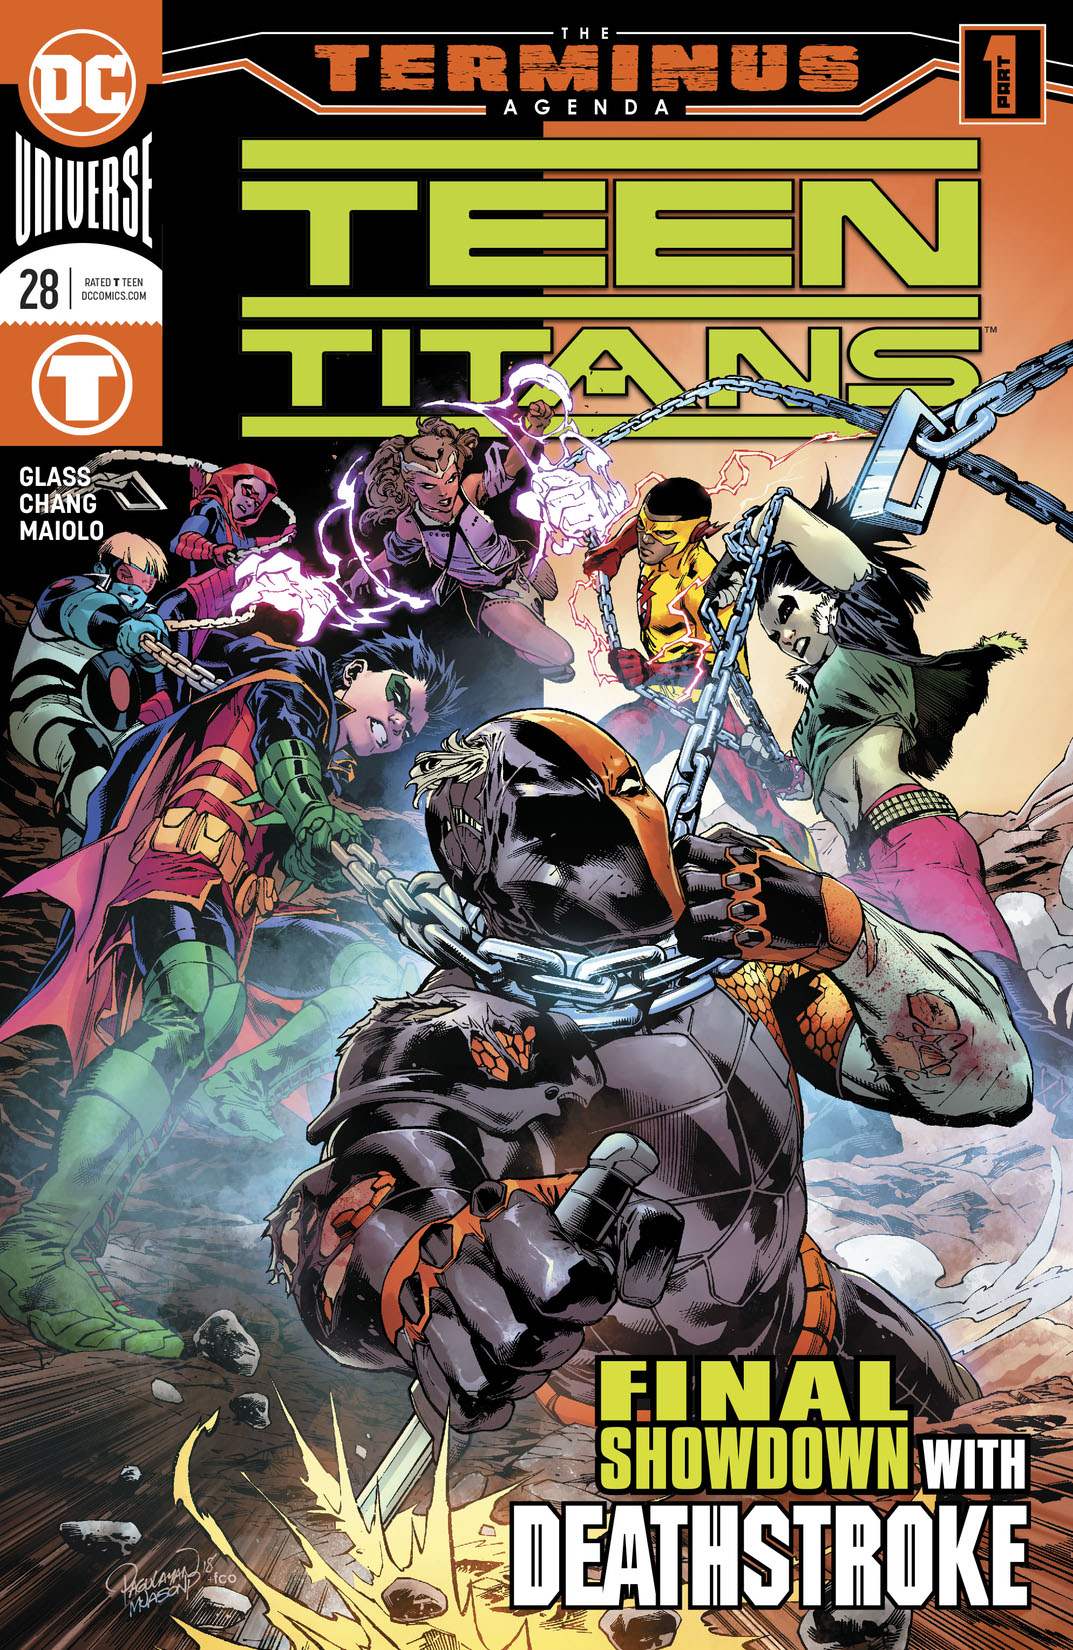 Teen Titans (2016-) #28 preview images